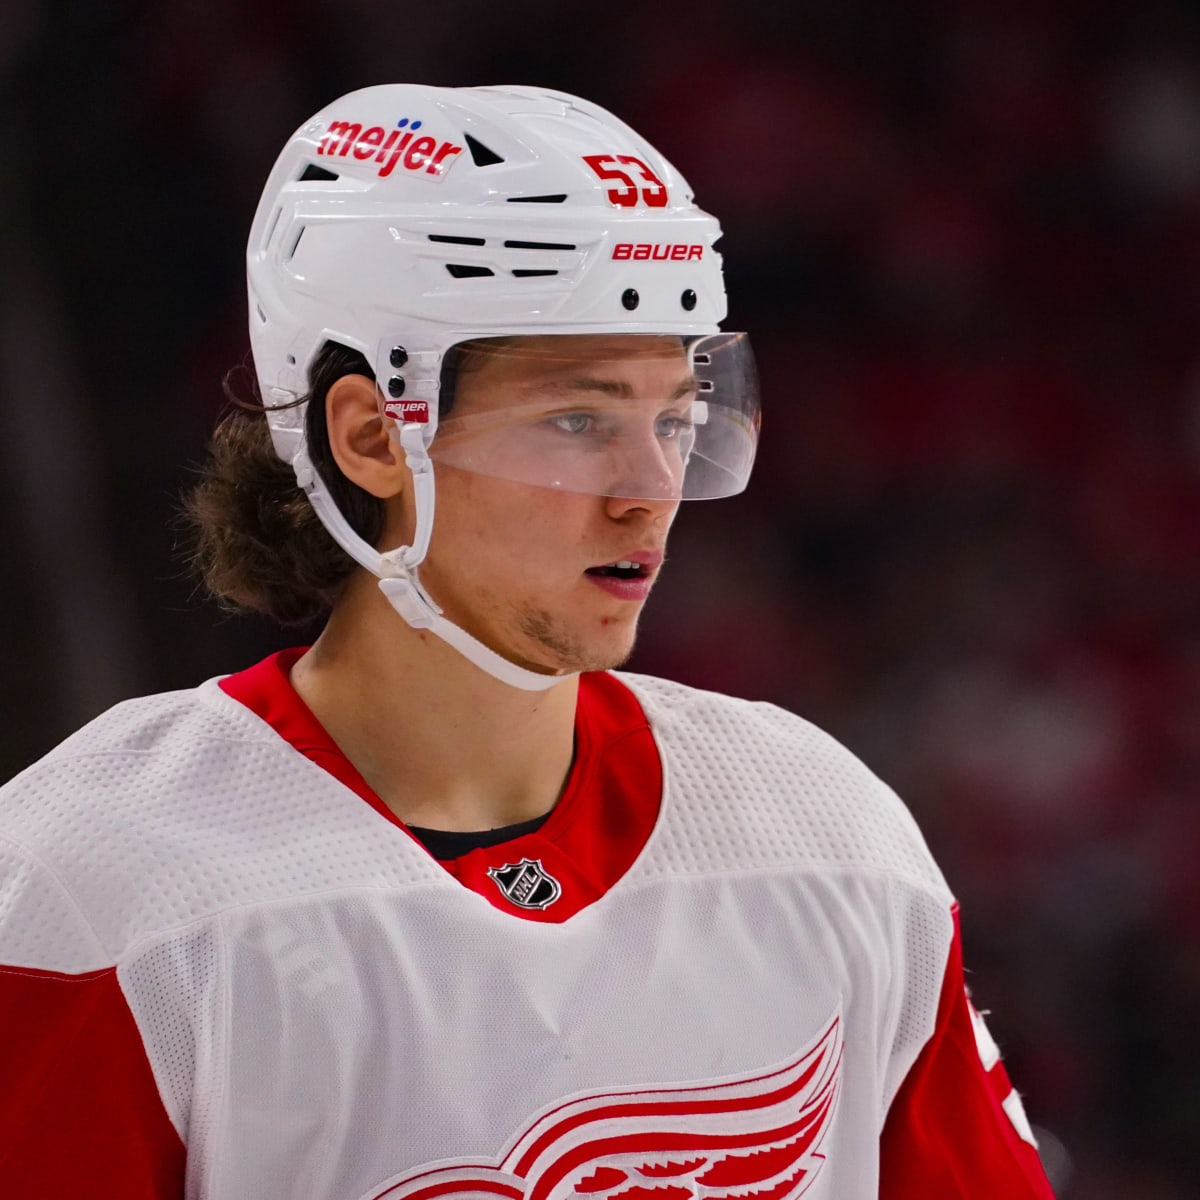 One contract on the Red Wings that is an absolute steal